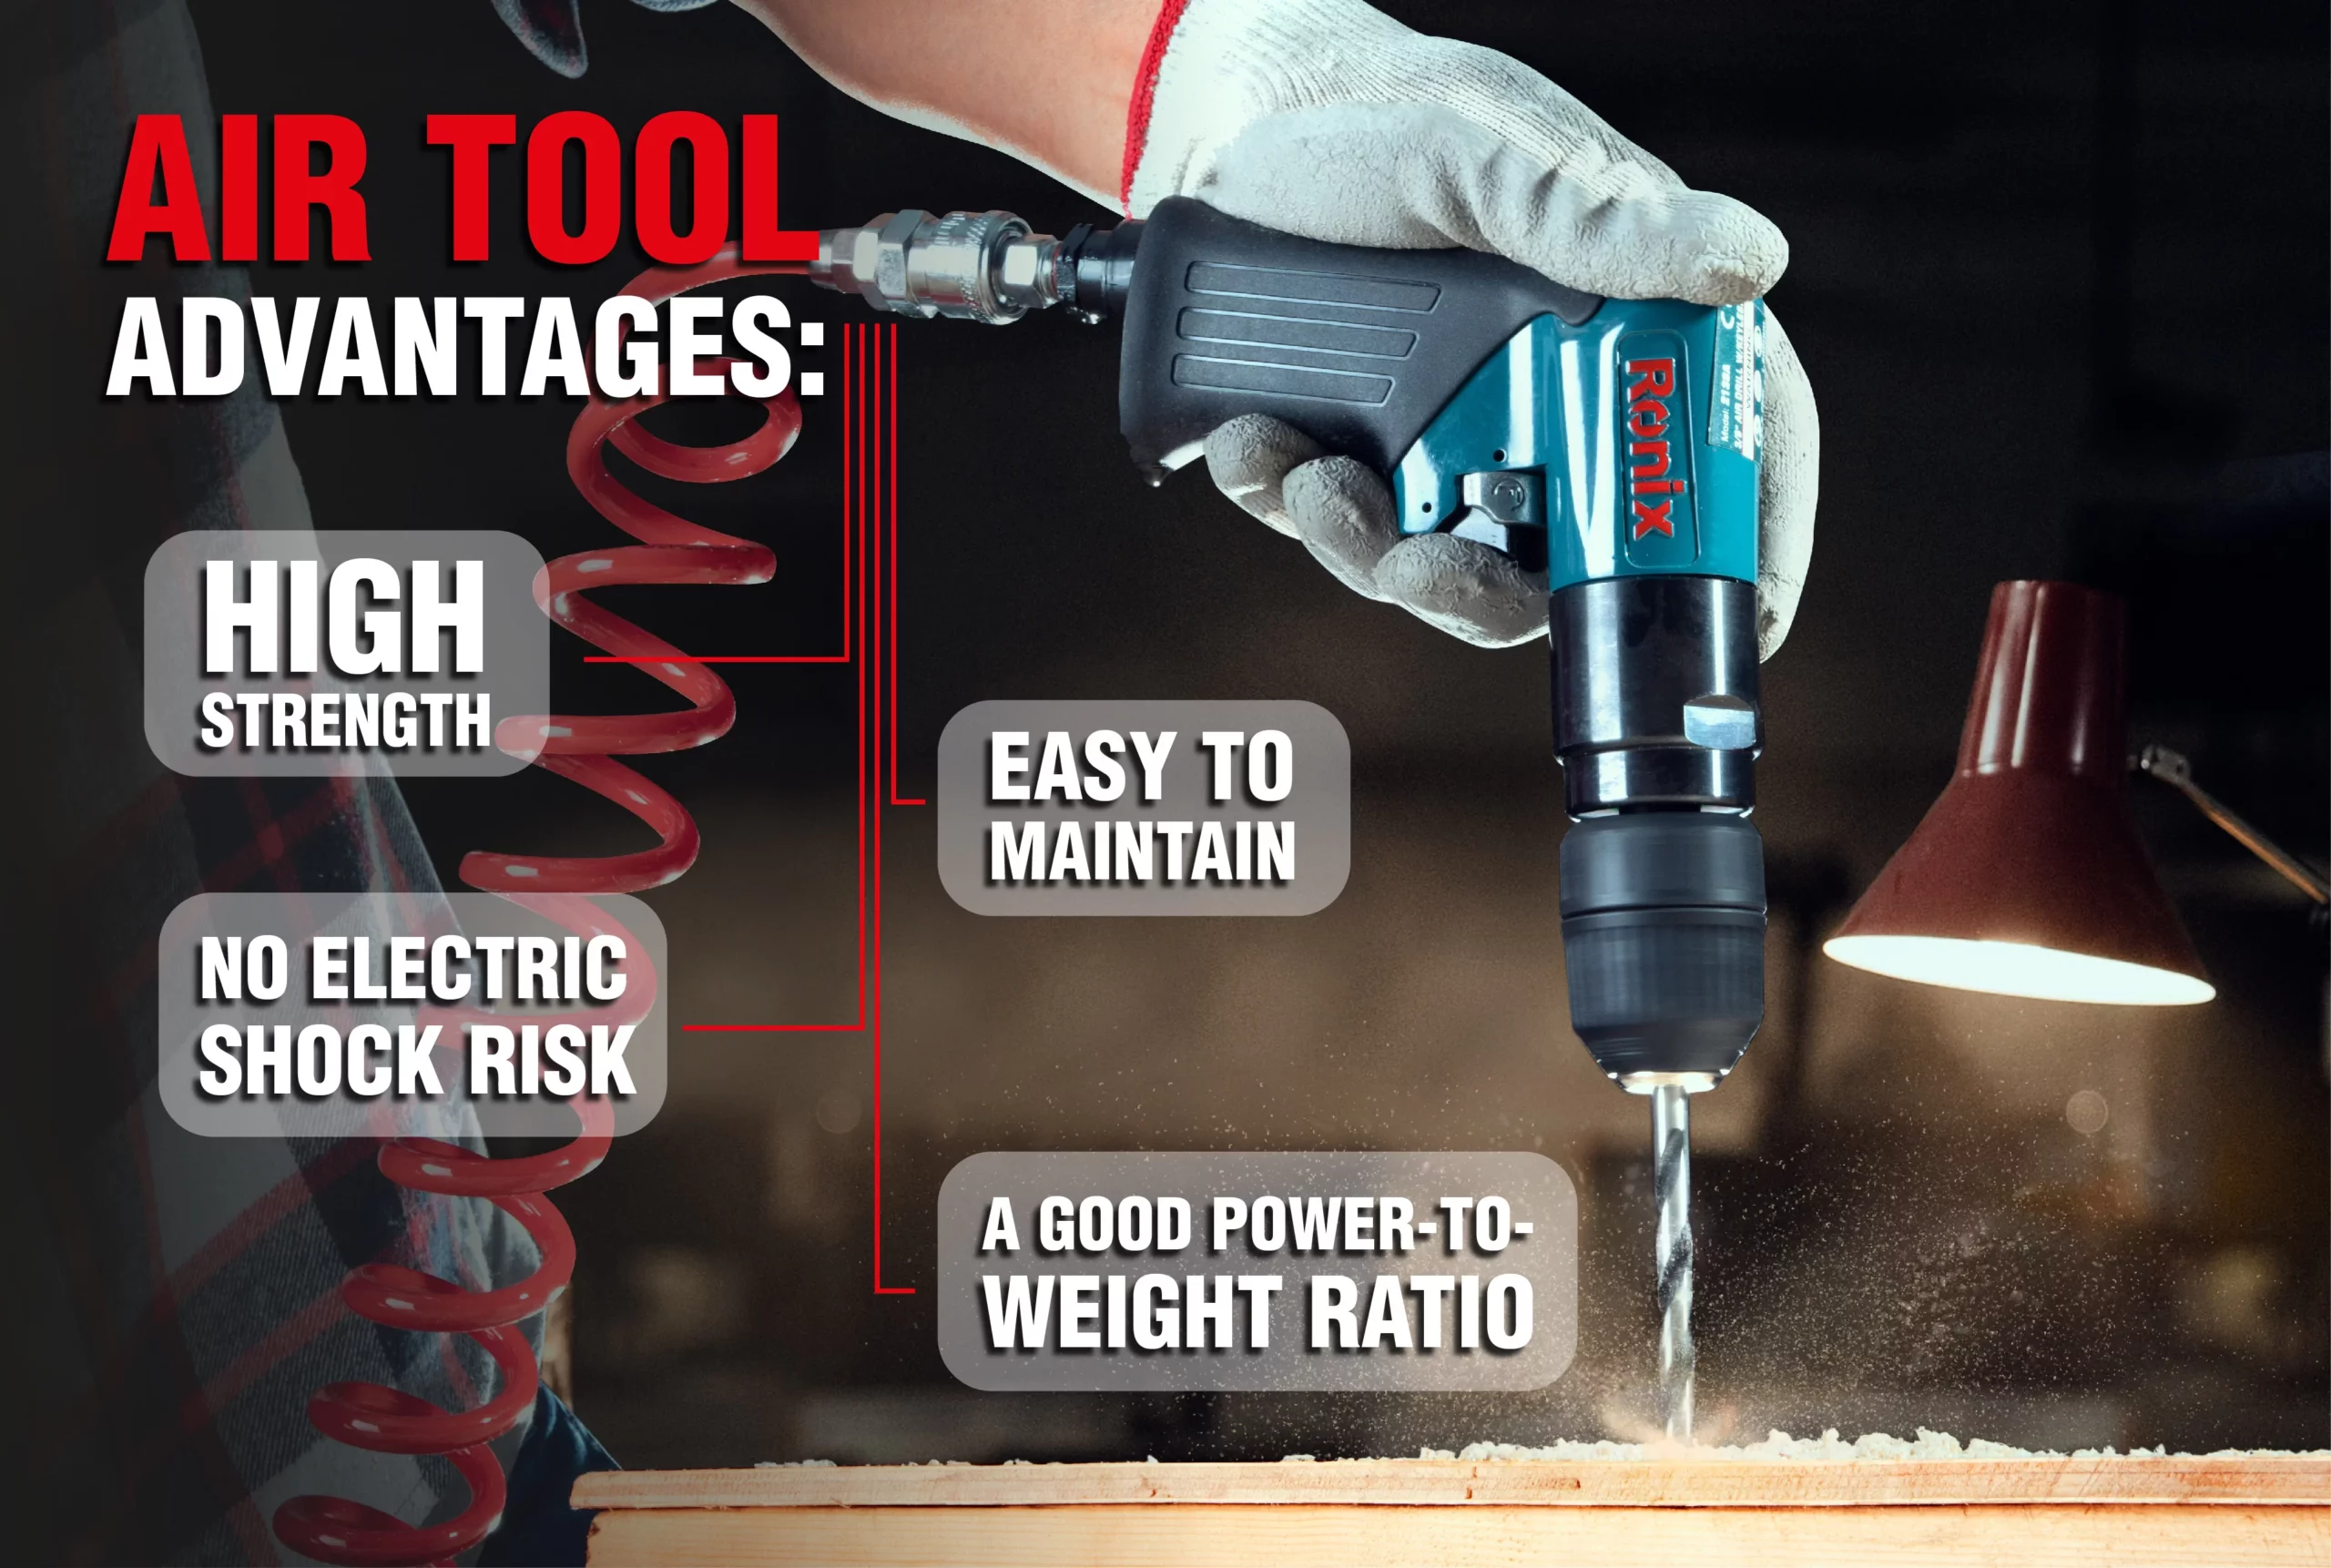 An Infographic about Air Tools